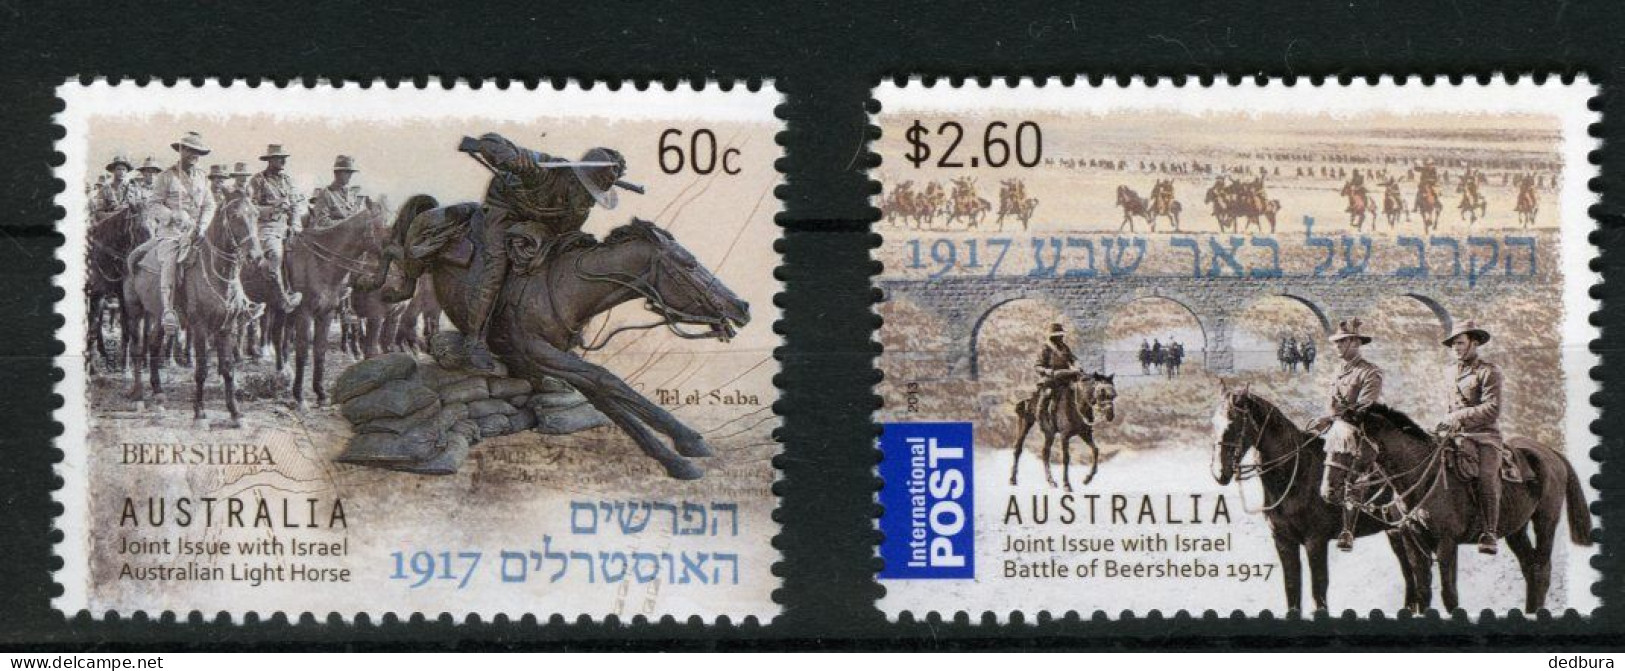 Australia-Israel Joint Issue 2013 - Battle Of Beersheba, 2 Complete Stamp Sets. Israel Stamps Without Tabs - Ungebraucht (ohne Tabs)